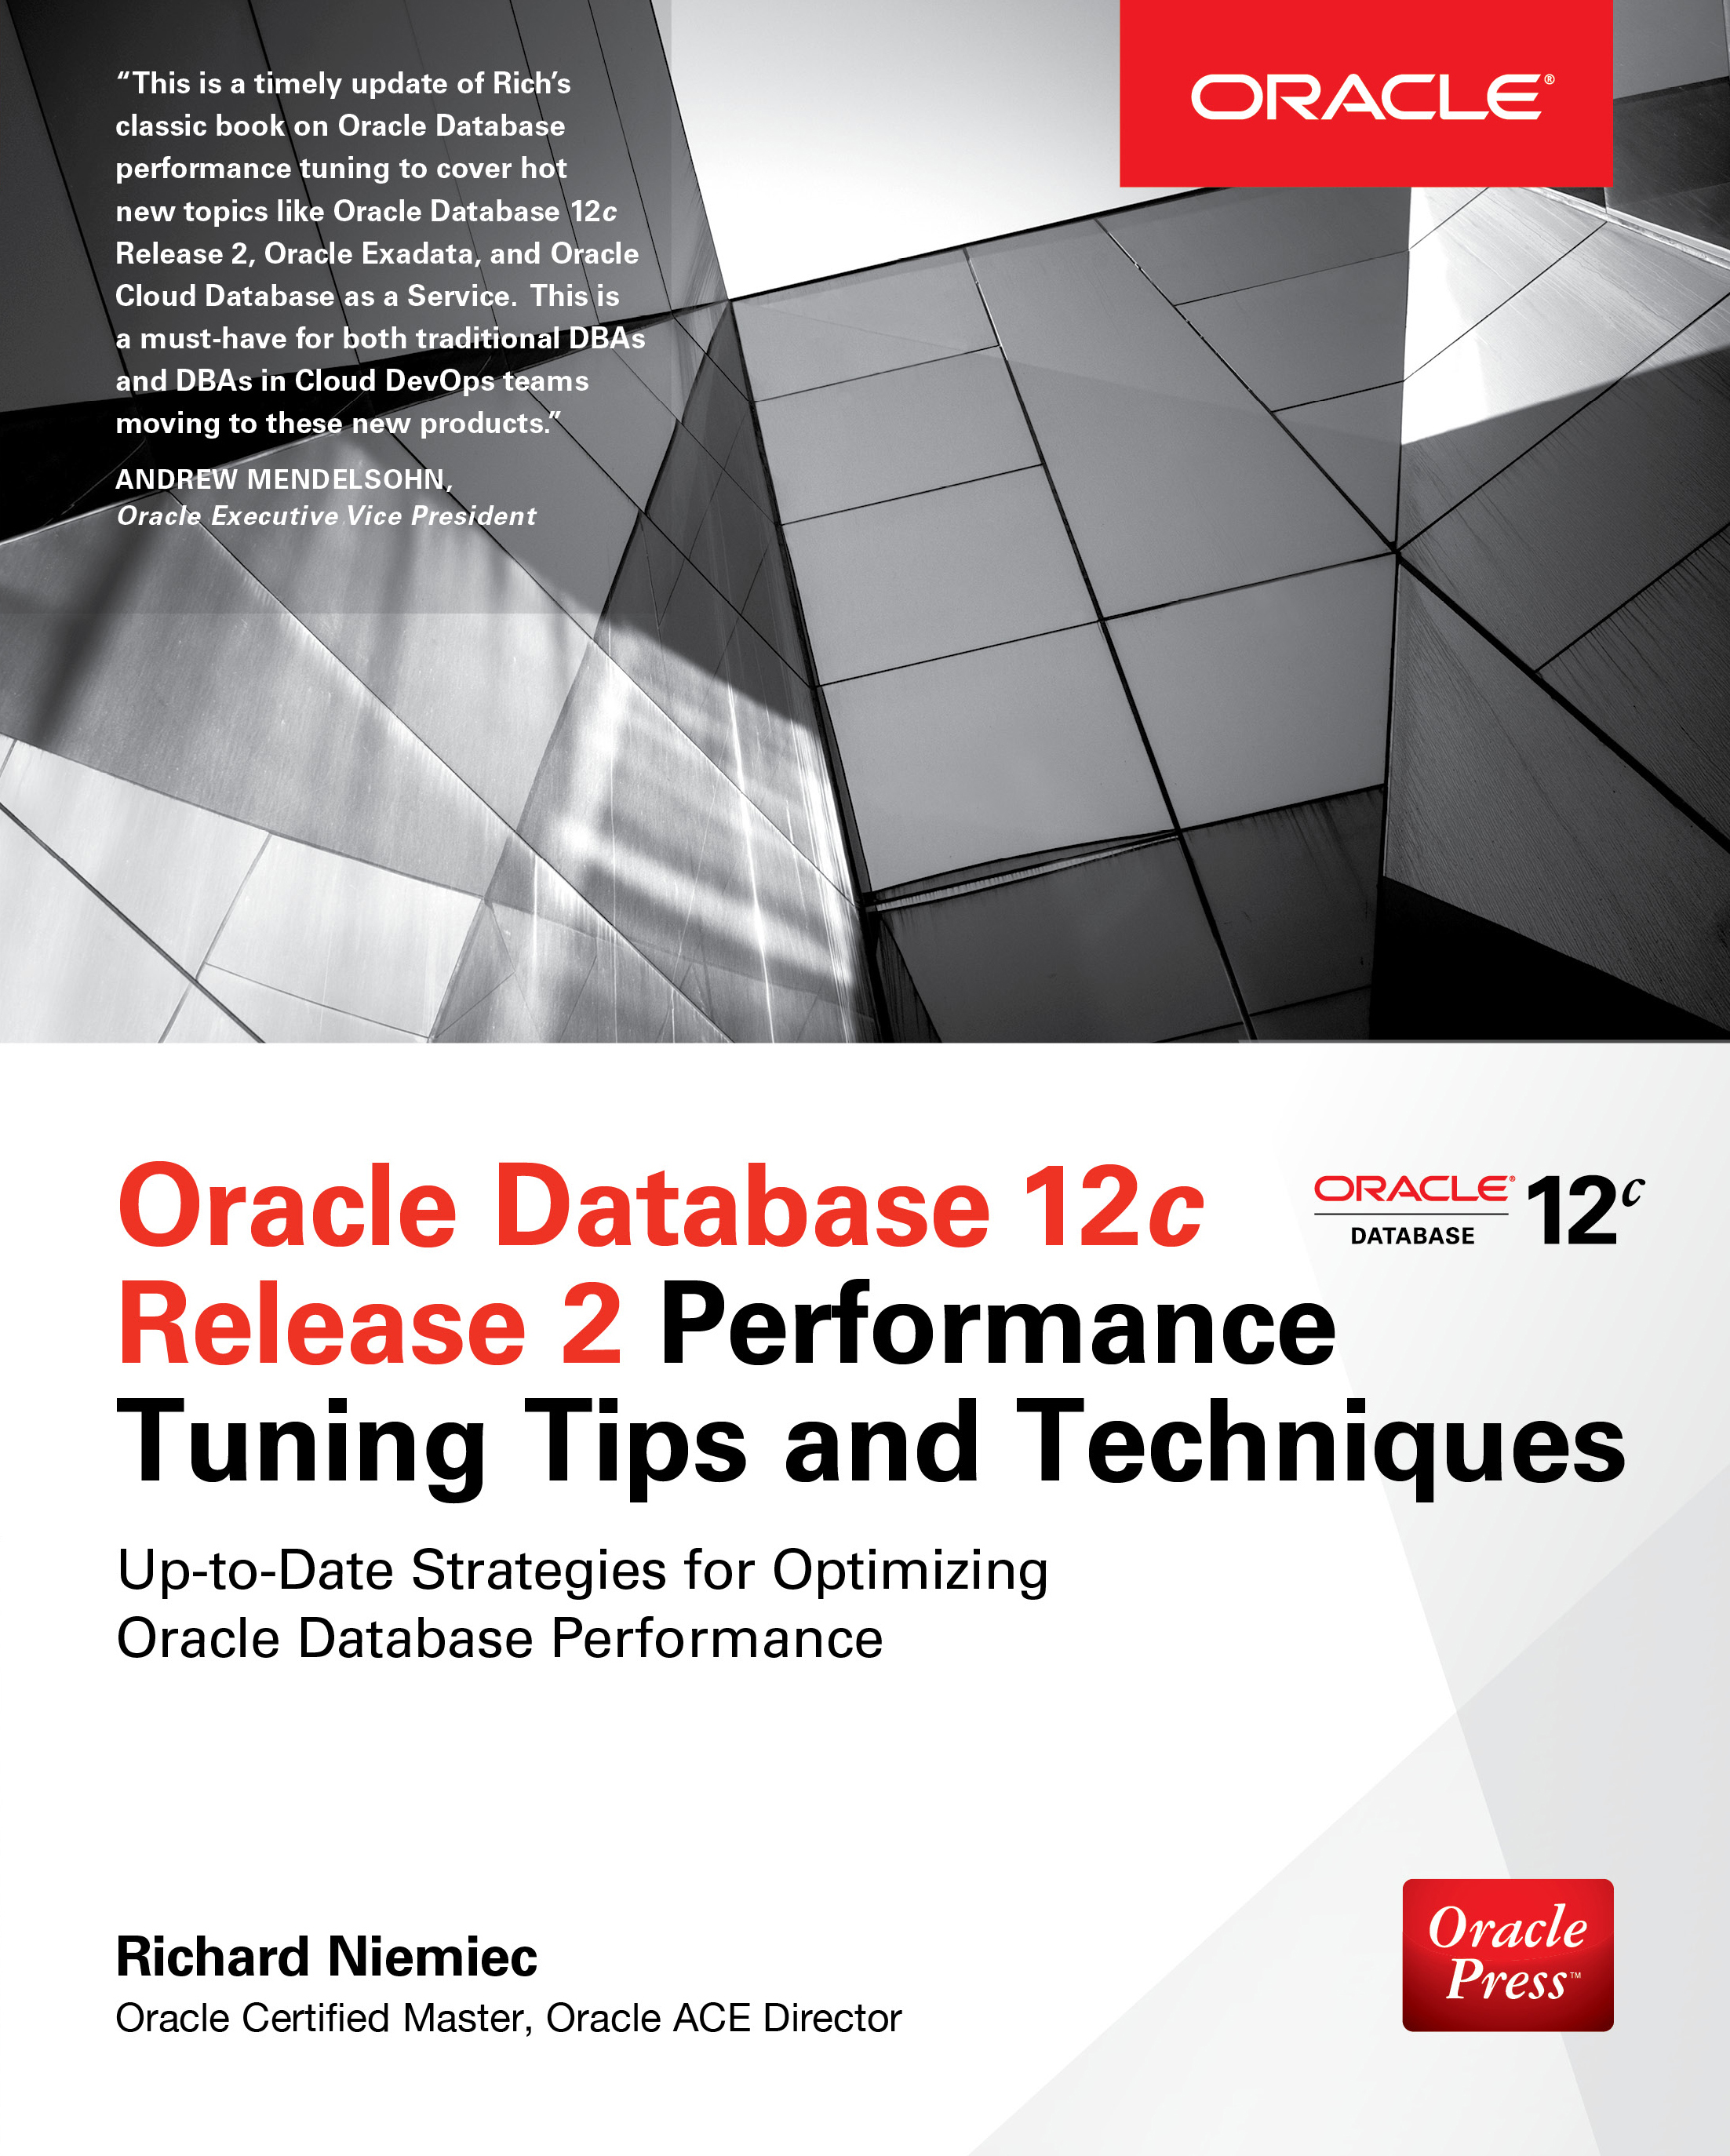 Oracle Database 12c Release 2 Performance Tuning Tips & Techniques - 50-99.99